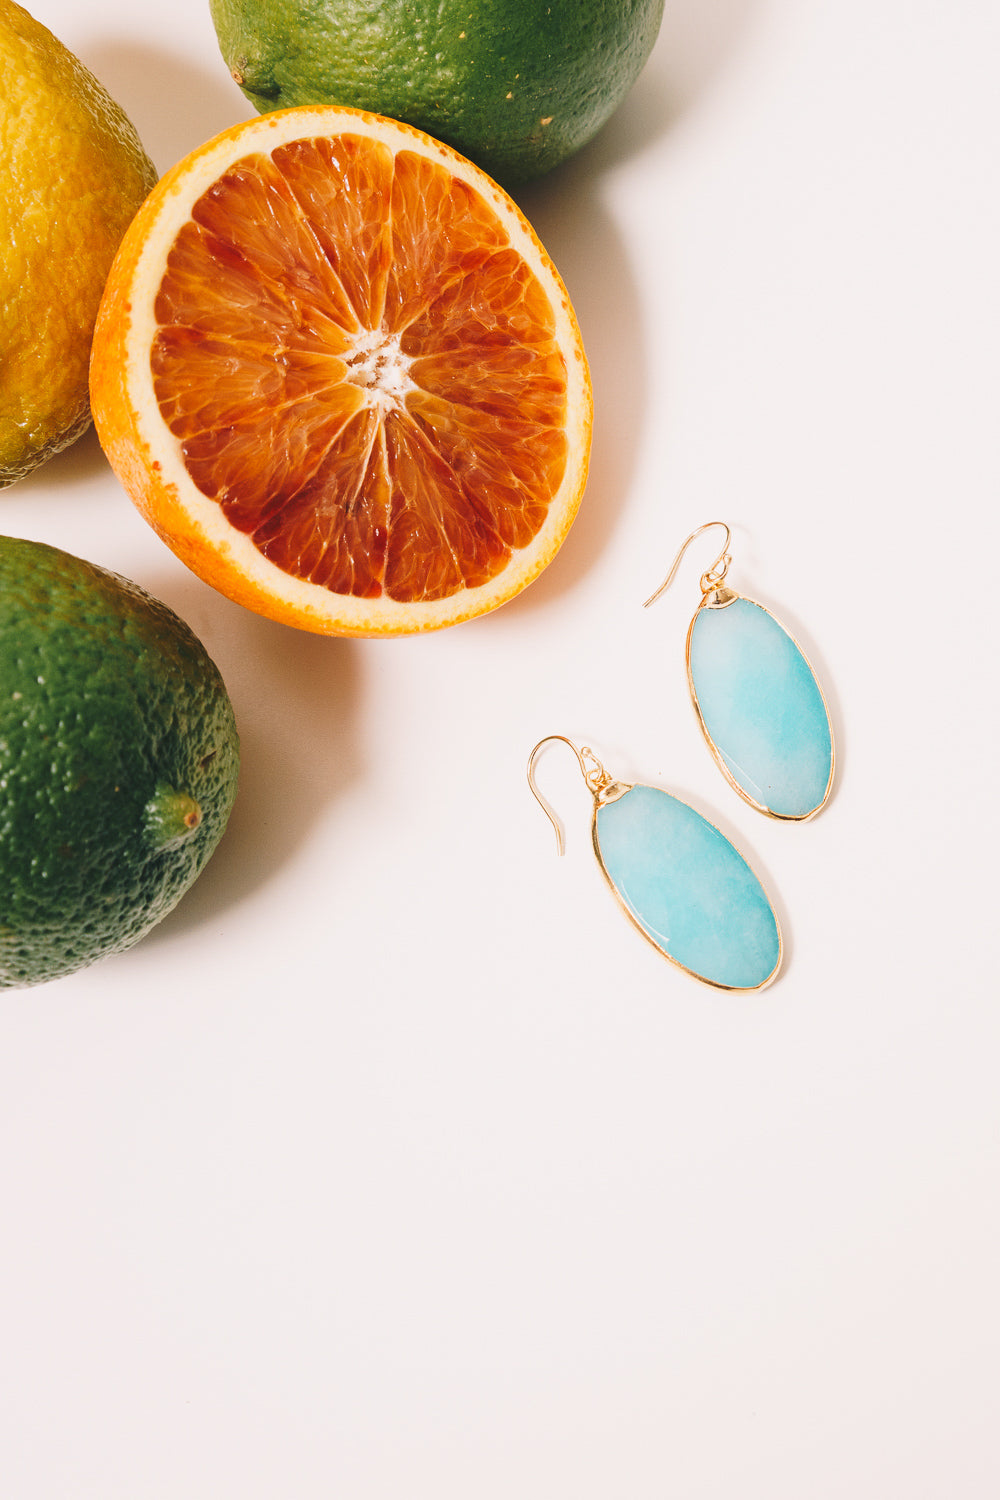 turquoise jade dangle earrings with citrus